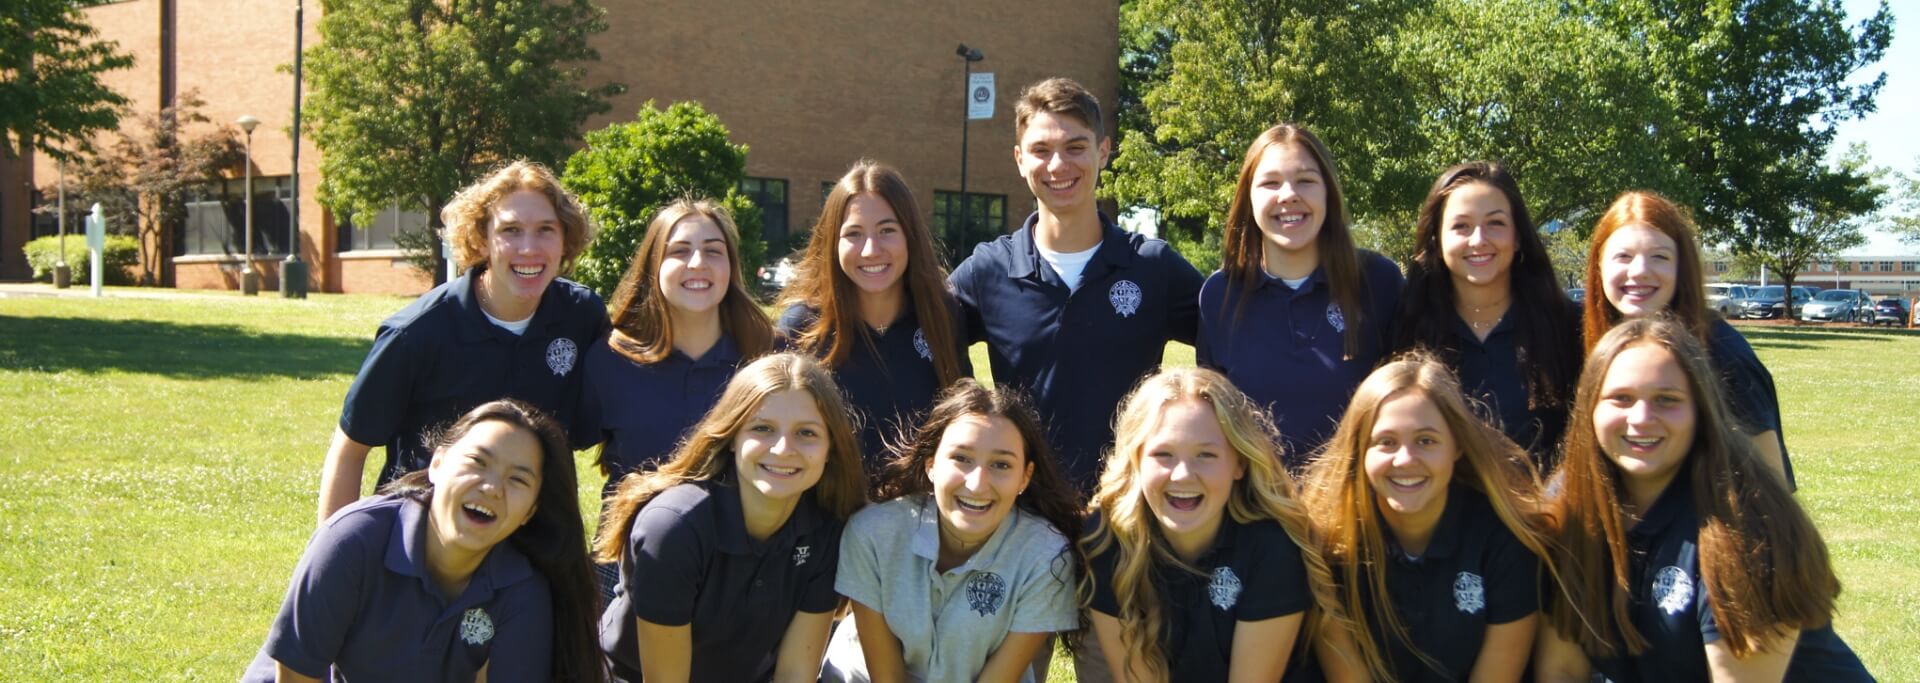 Group of smiling students in St. Pius X school shirts